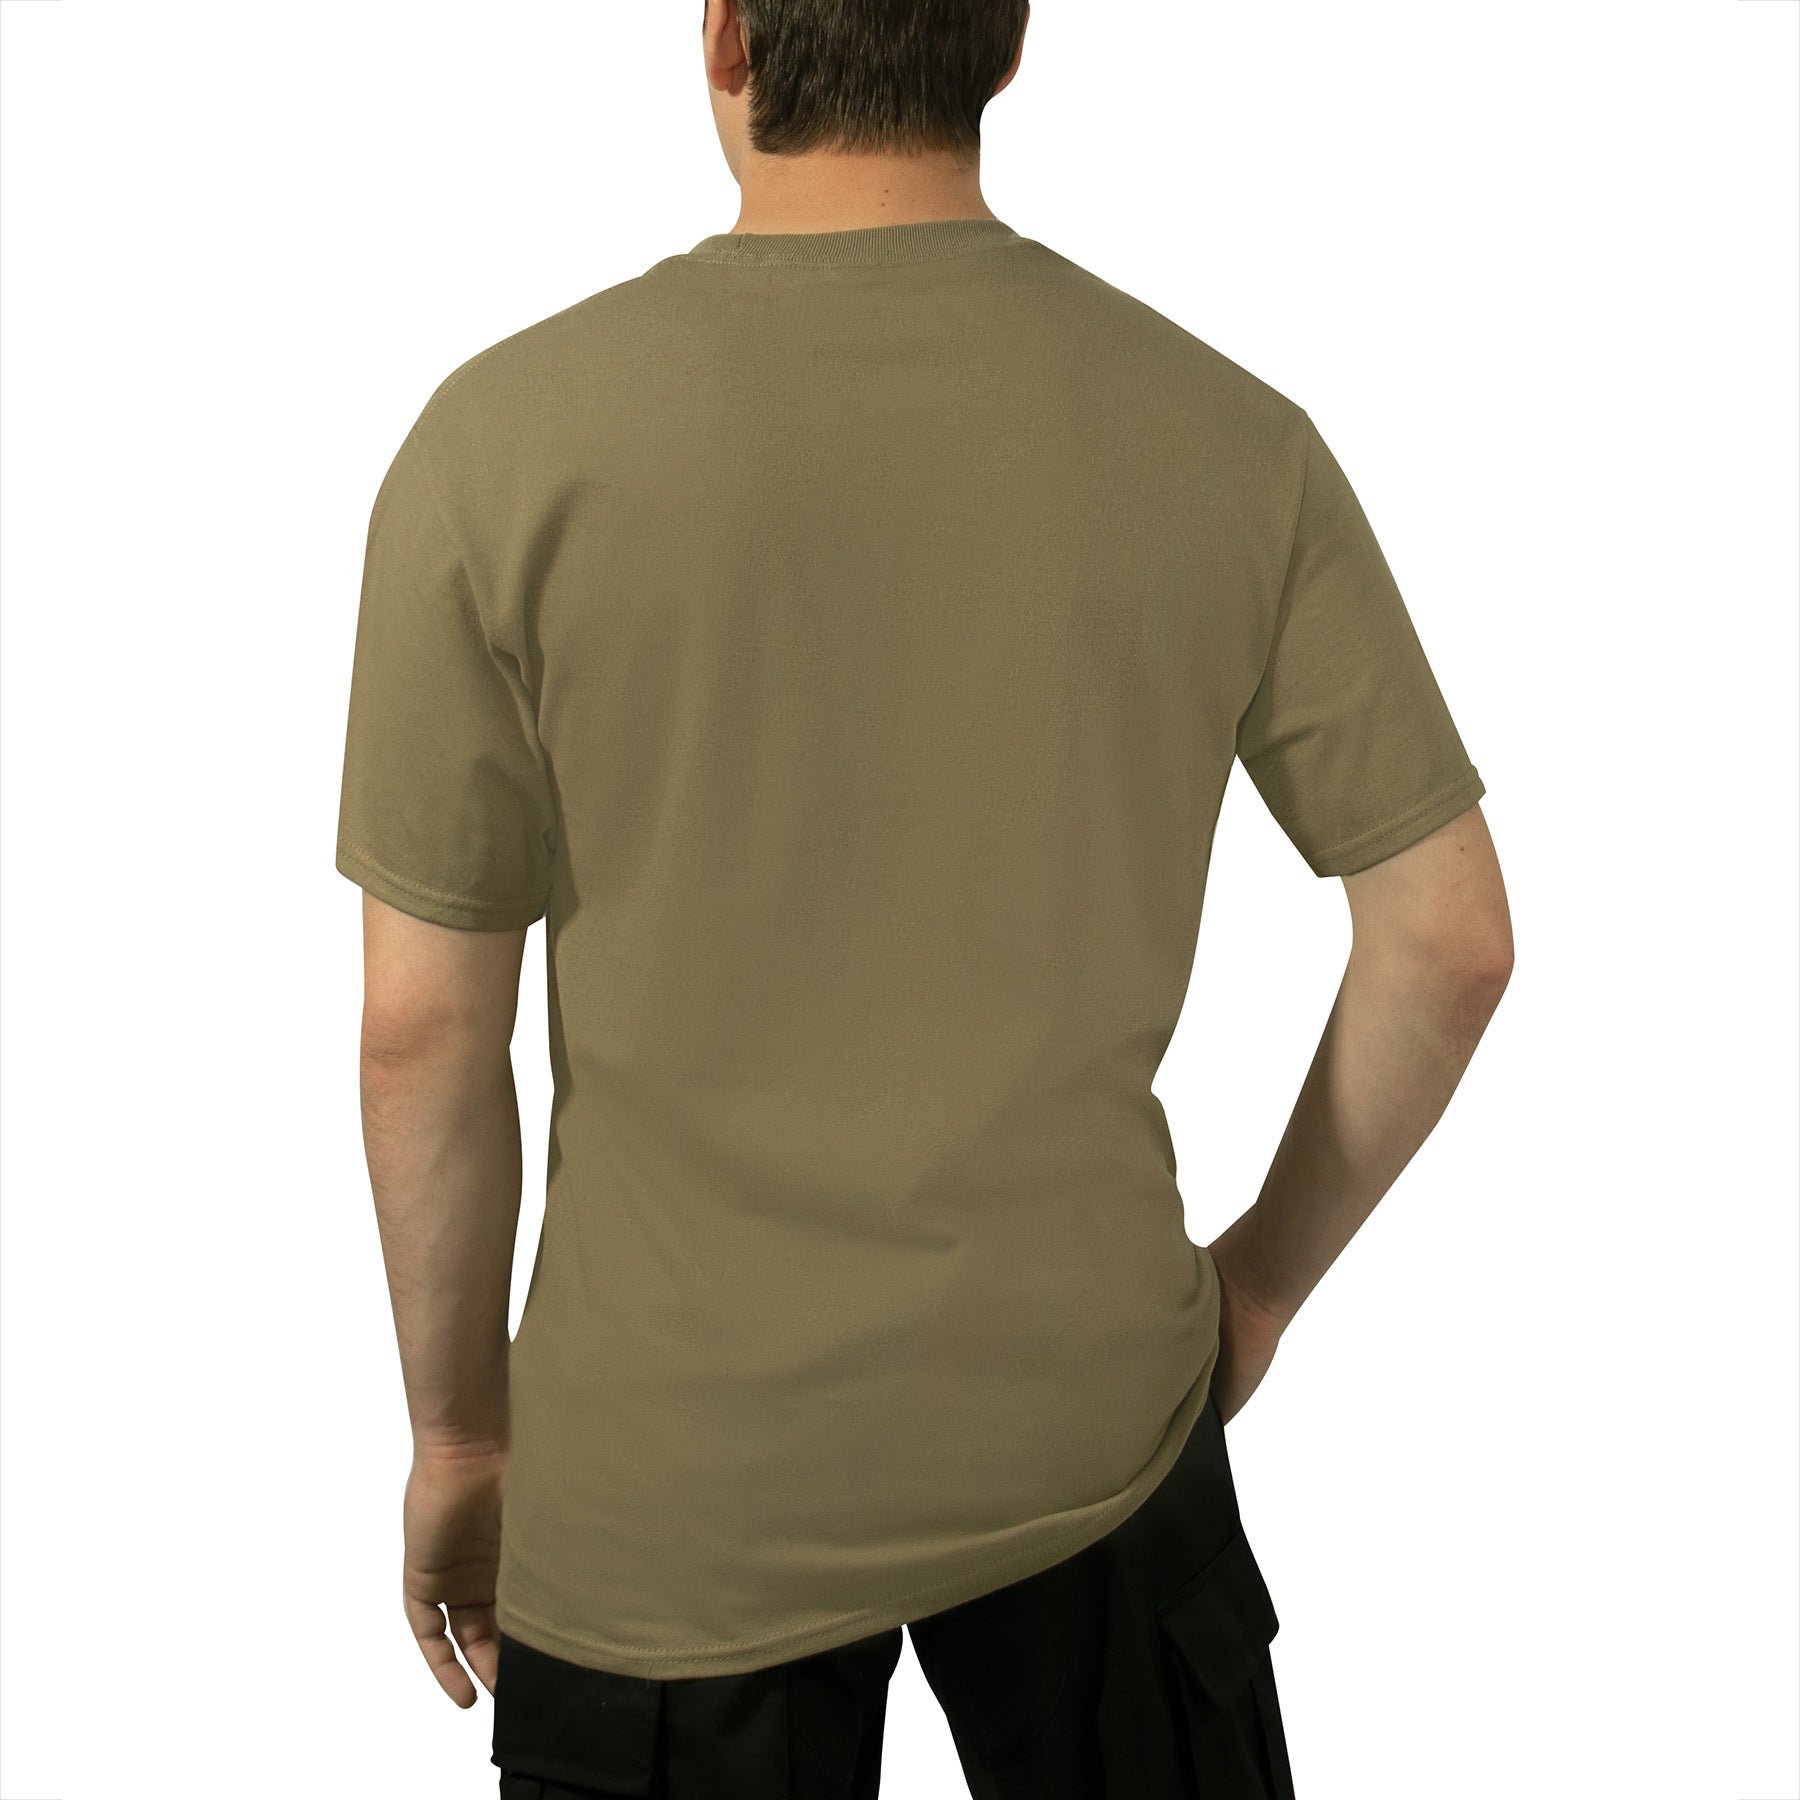 [AR 670-1][Military] Cotton Marines Physical Training T-Shirts